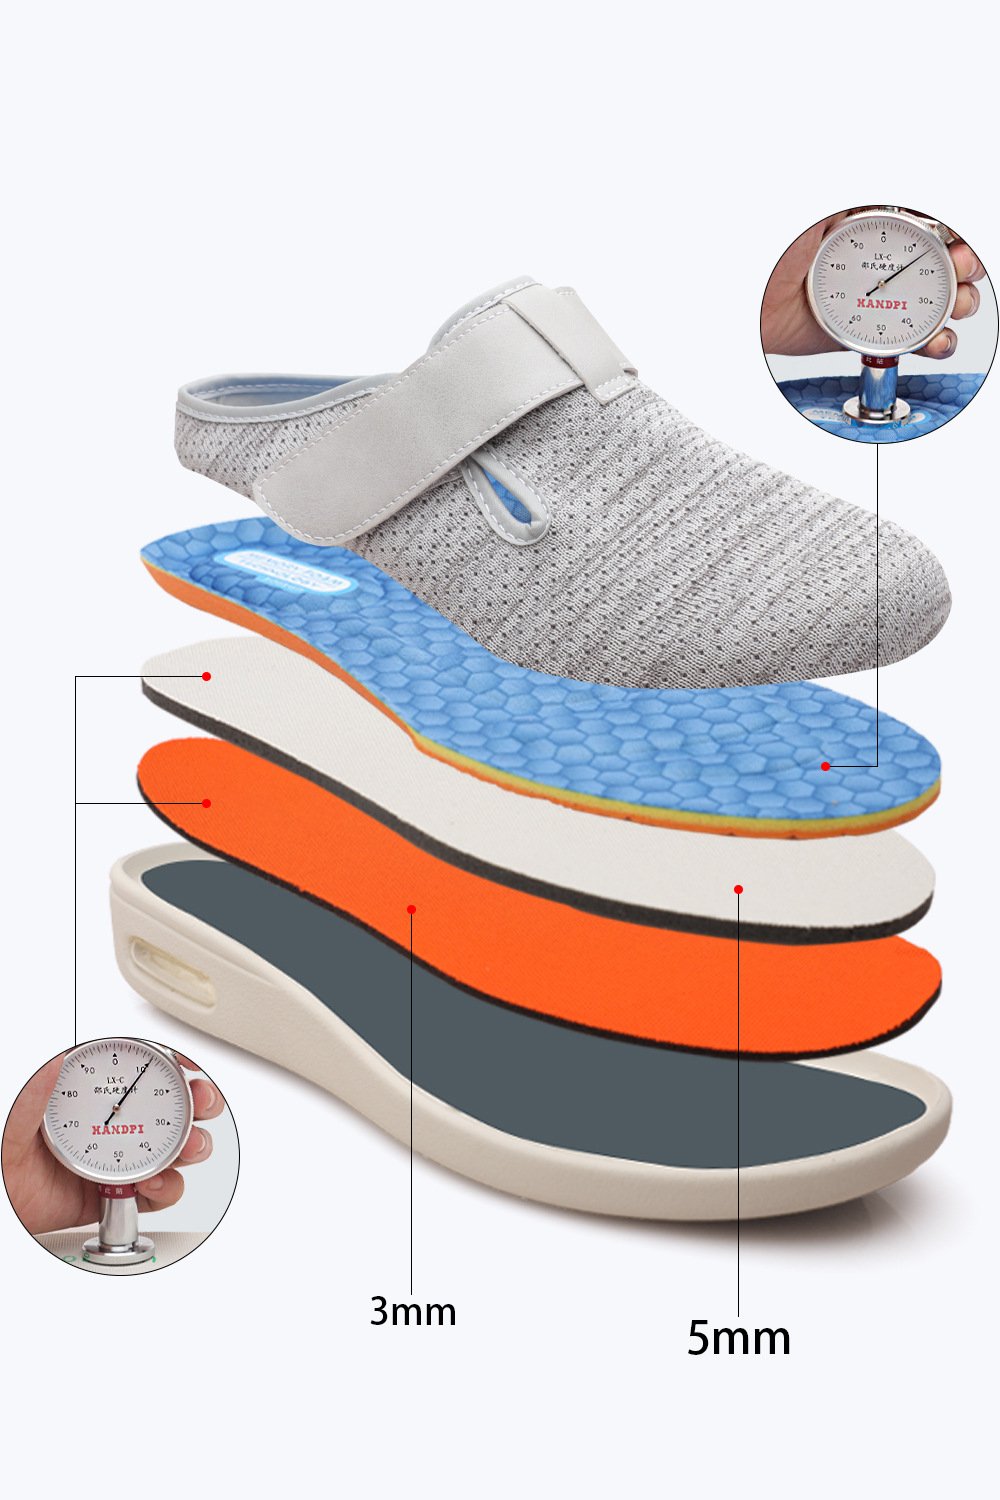 Fitsshoes Wide Diabetic For Swollen Feet Slip-on light air cushion orthopedic shoes